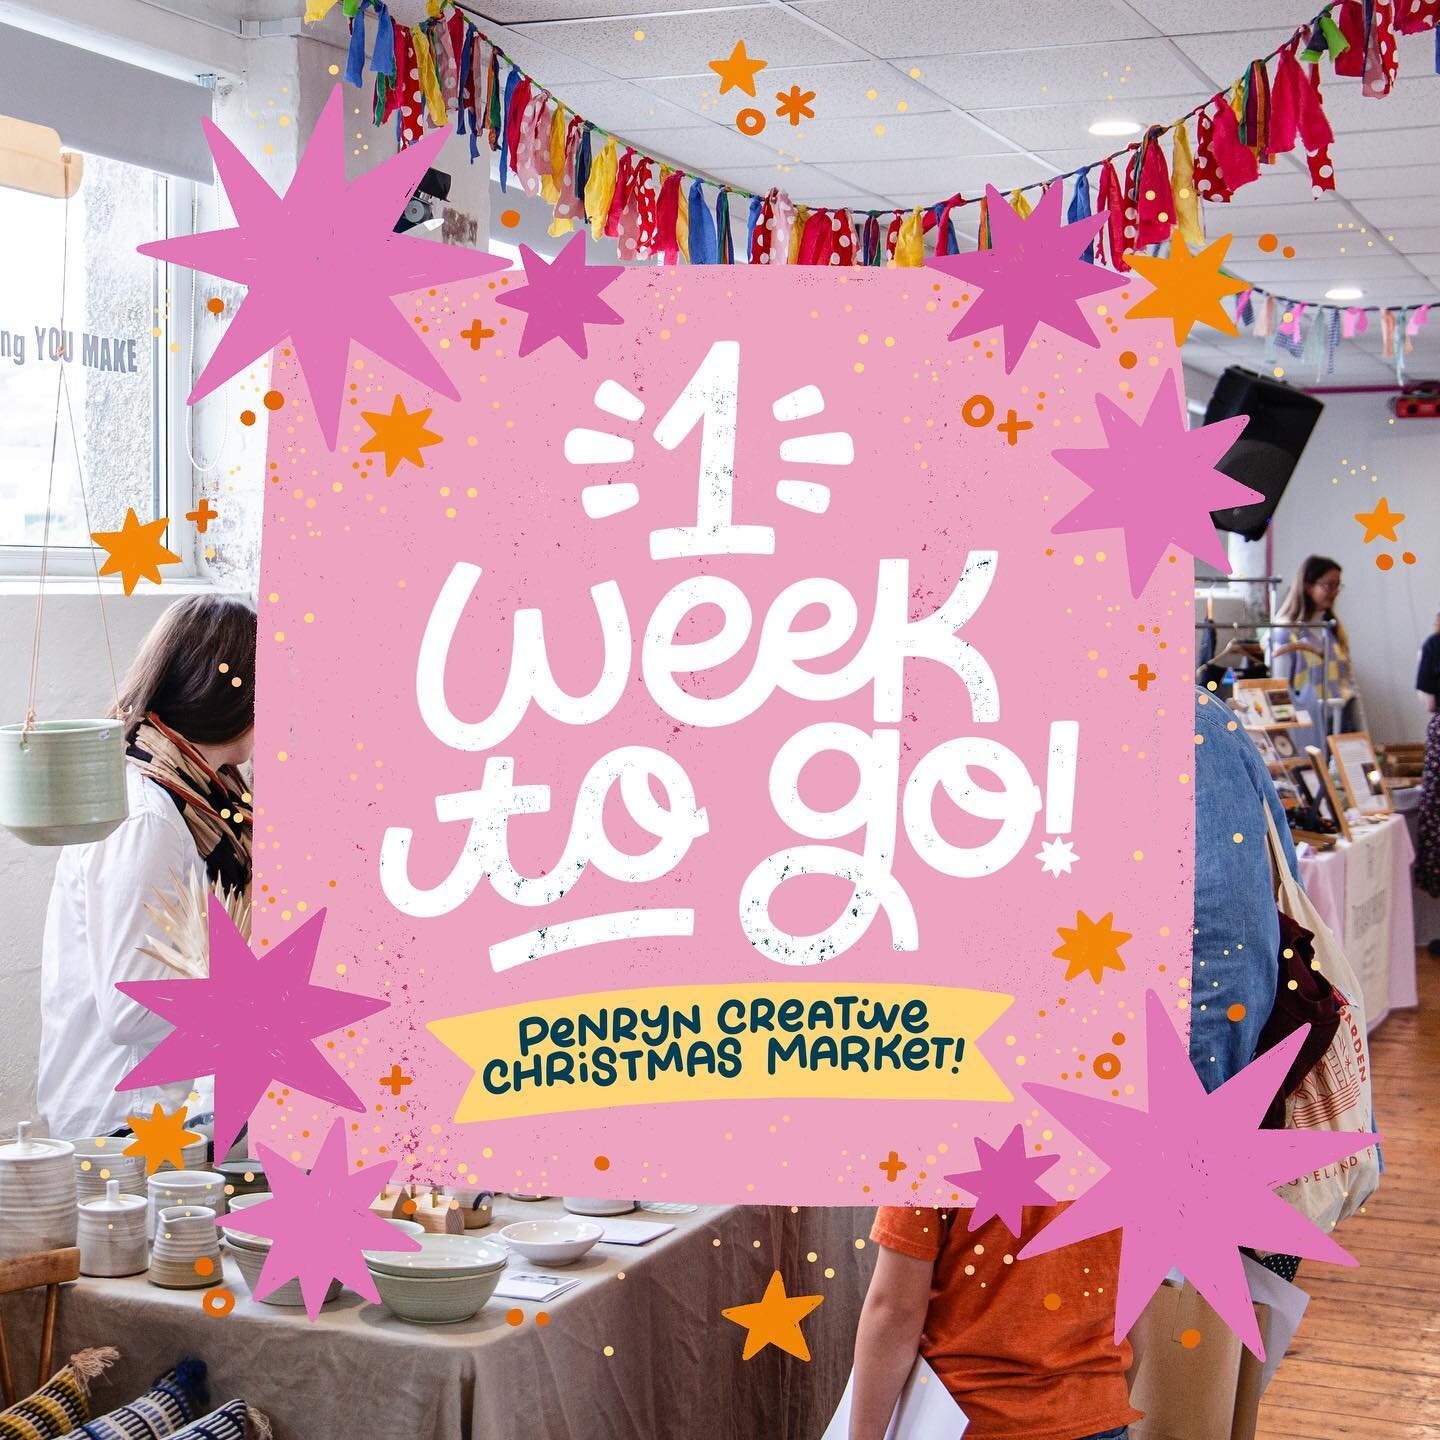 Just one week until our Creative Christmas Market and I&rsquo;m so excited!!! 🎄✨ 

@dungaroos_ and I have spent the past 4 months working super hard to bring together the most fabulous, festive weekend full of colour and creativity and it&rsquo;s ju